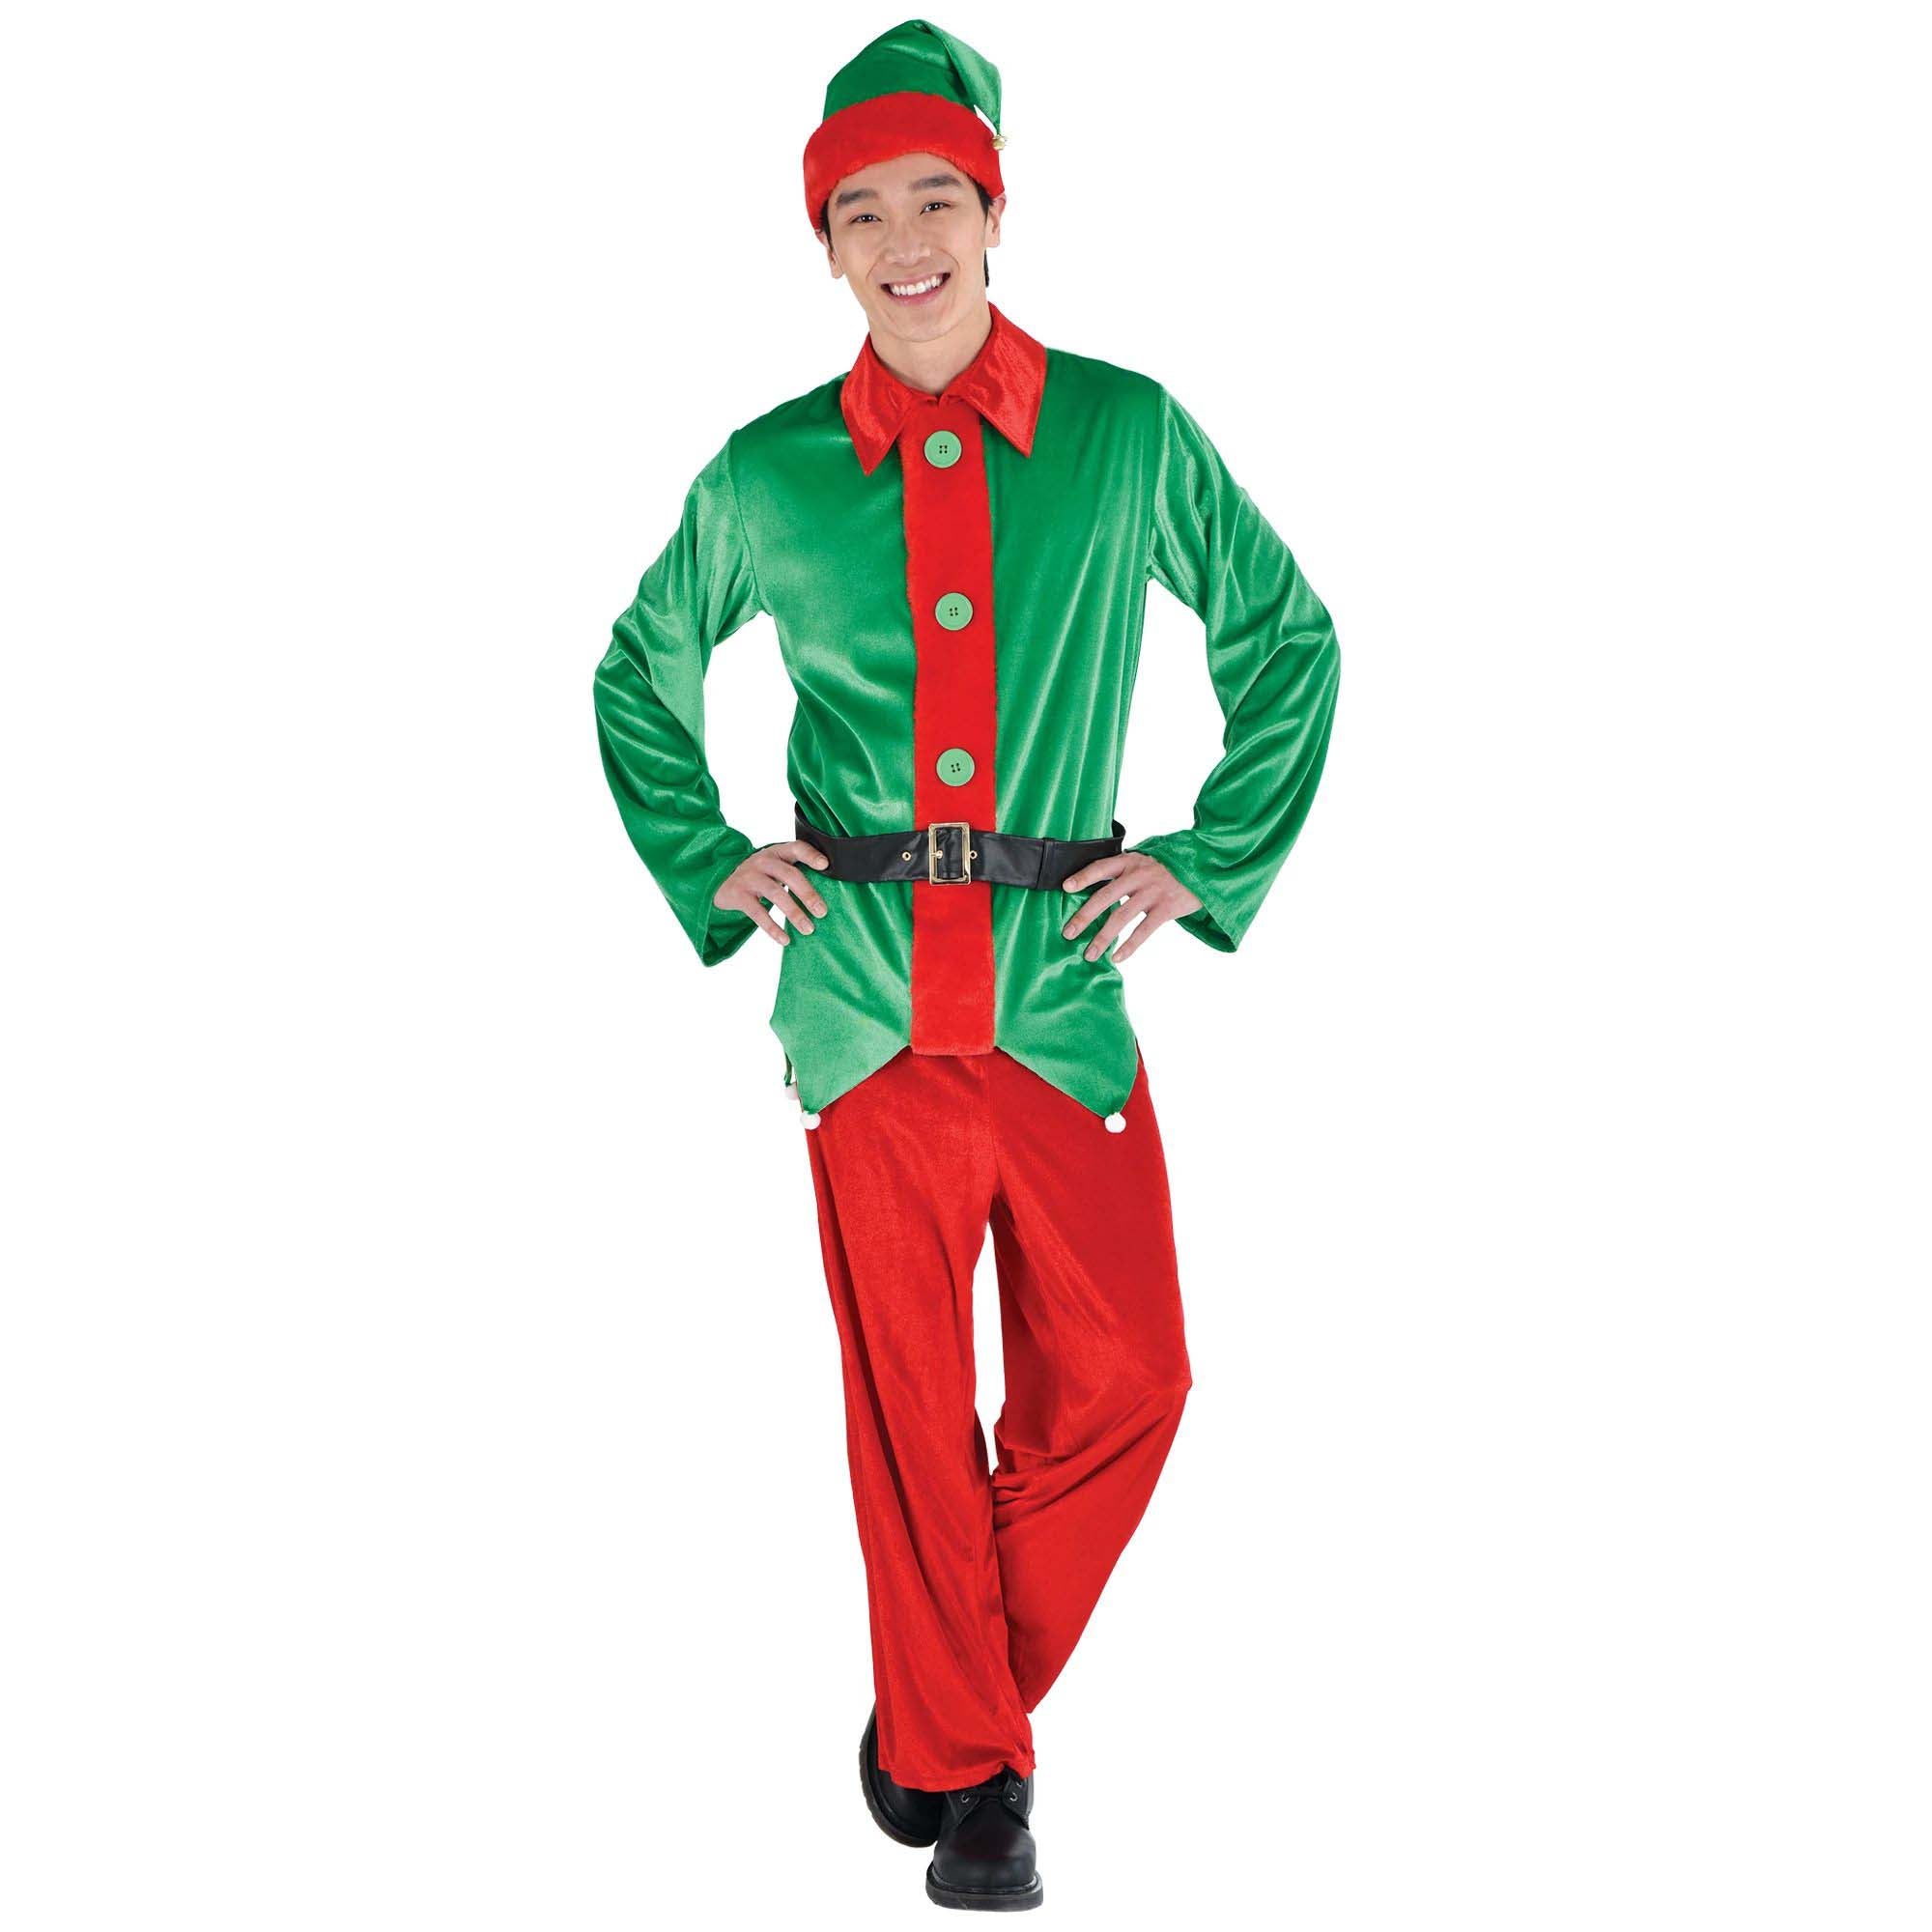 Elf Costume for Adults, Green Jacket and Red Pants